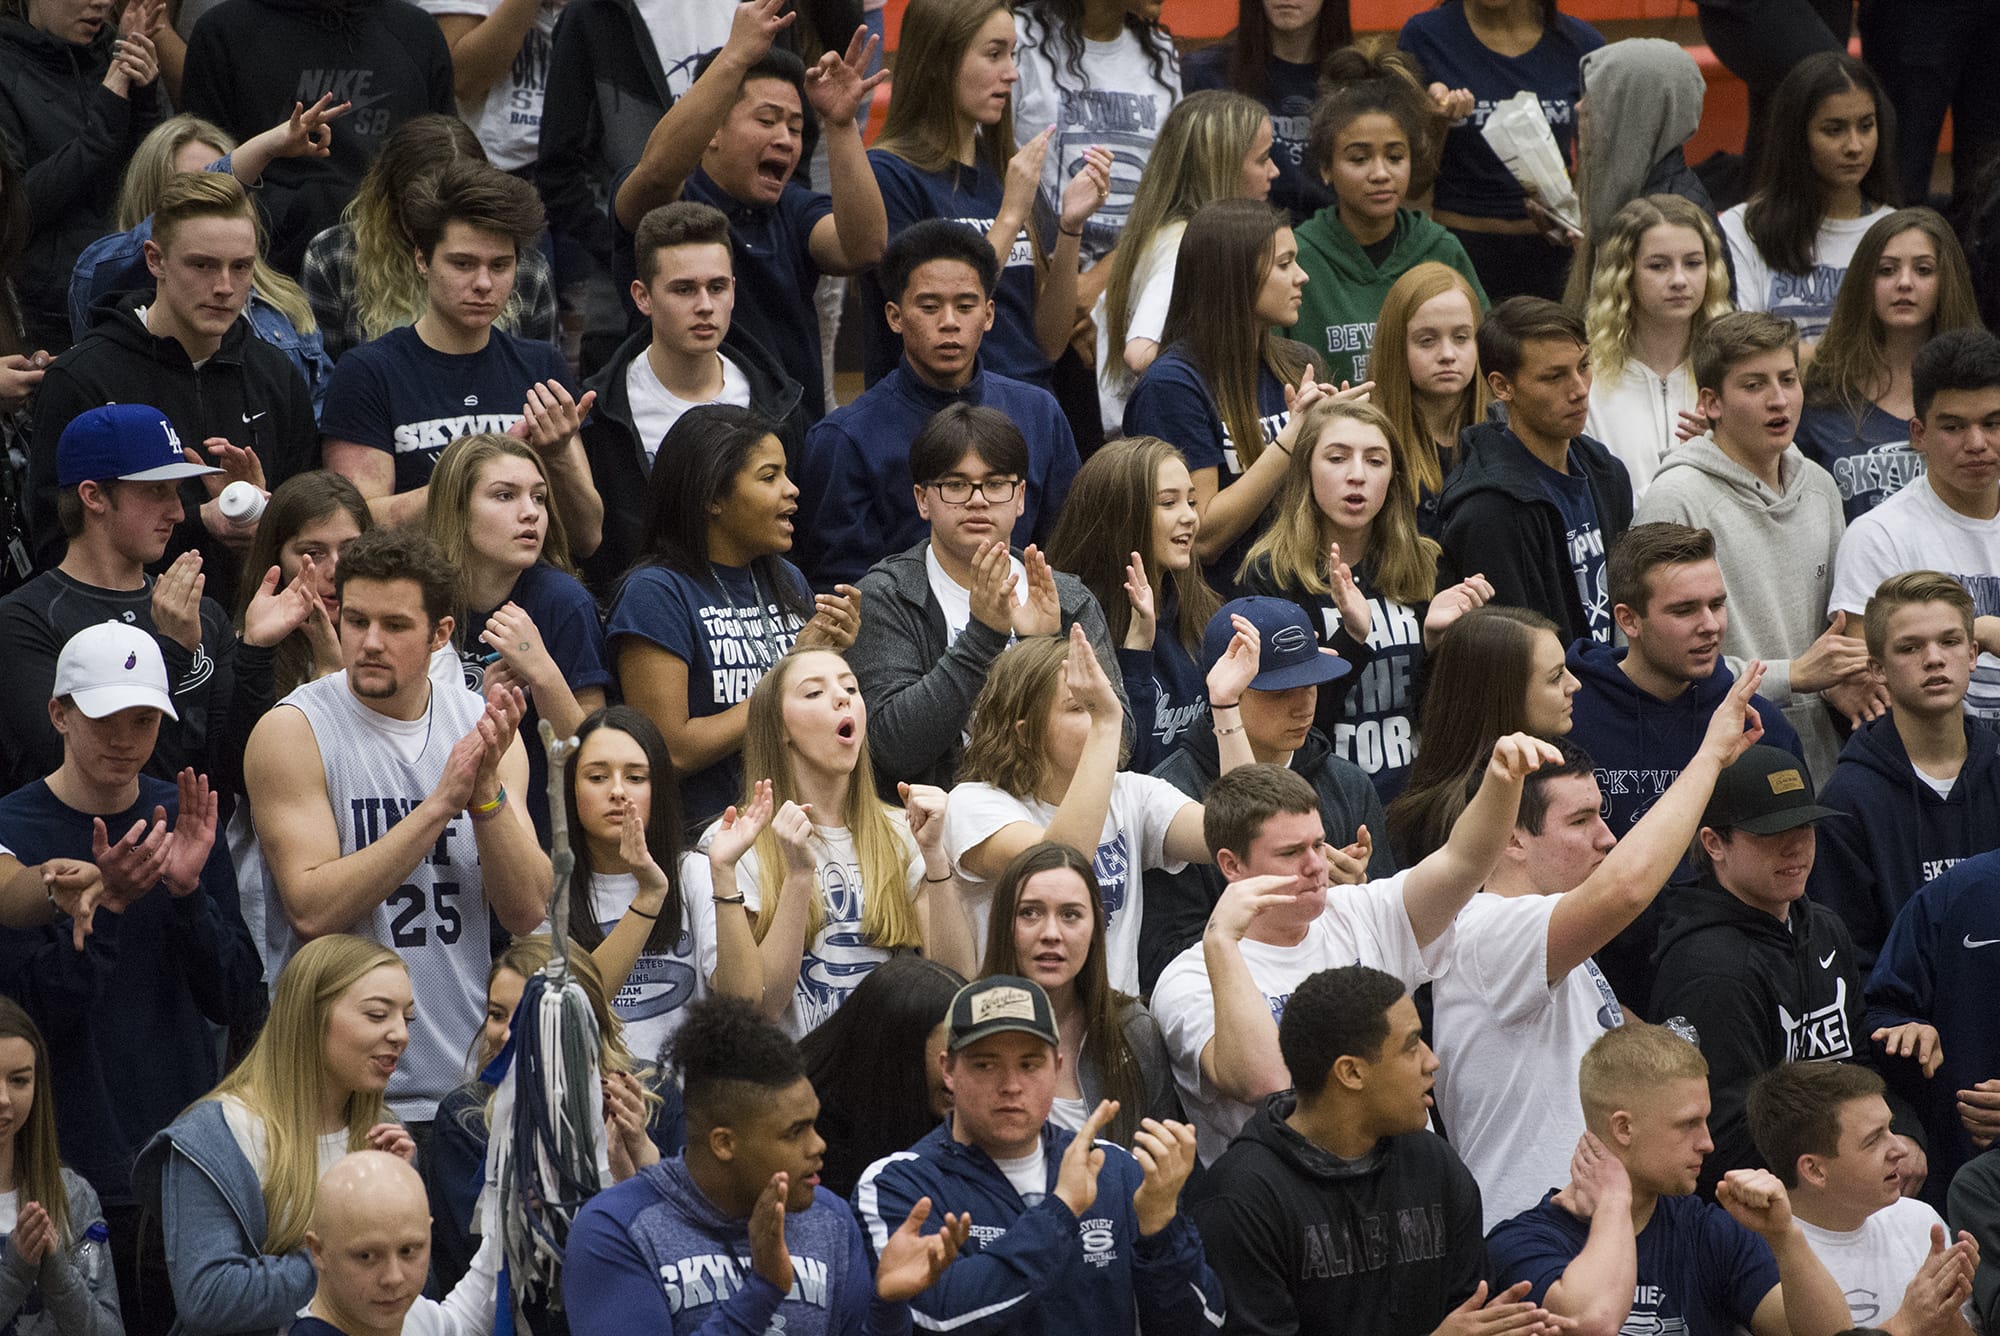 Skyview Storm fans cheer on the boys basketball team during the 4A regional game against Enumclaw at Battle Ground High School, Saturday February 24, 2018.